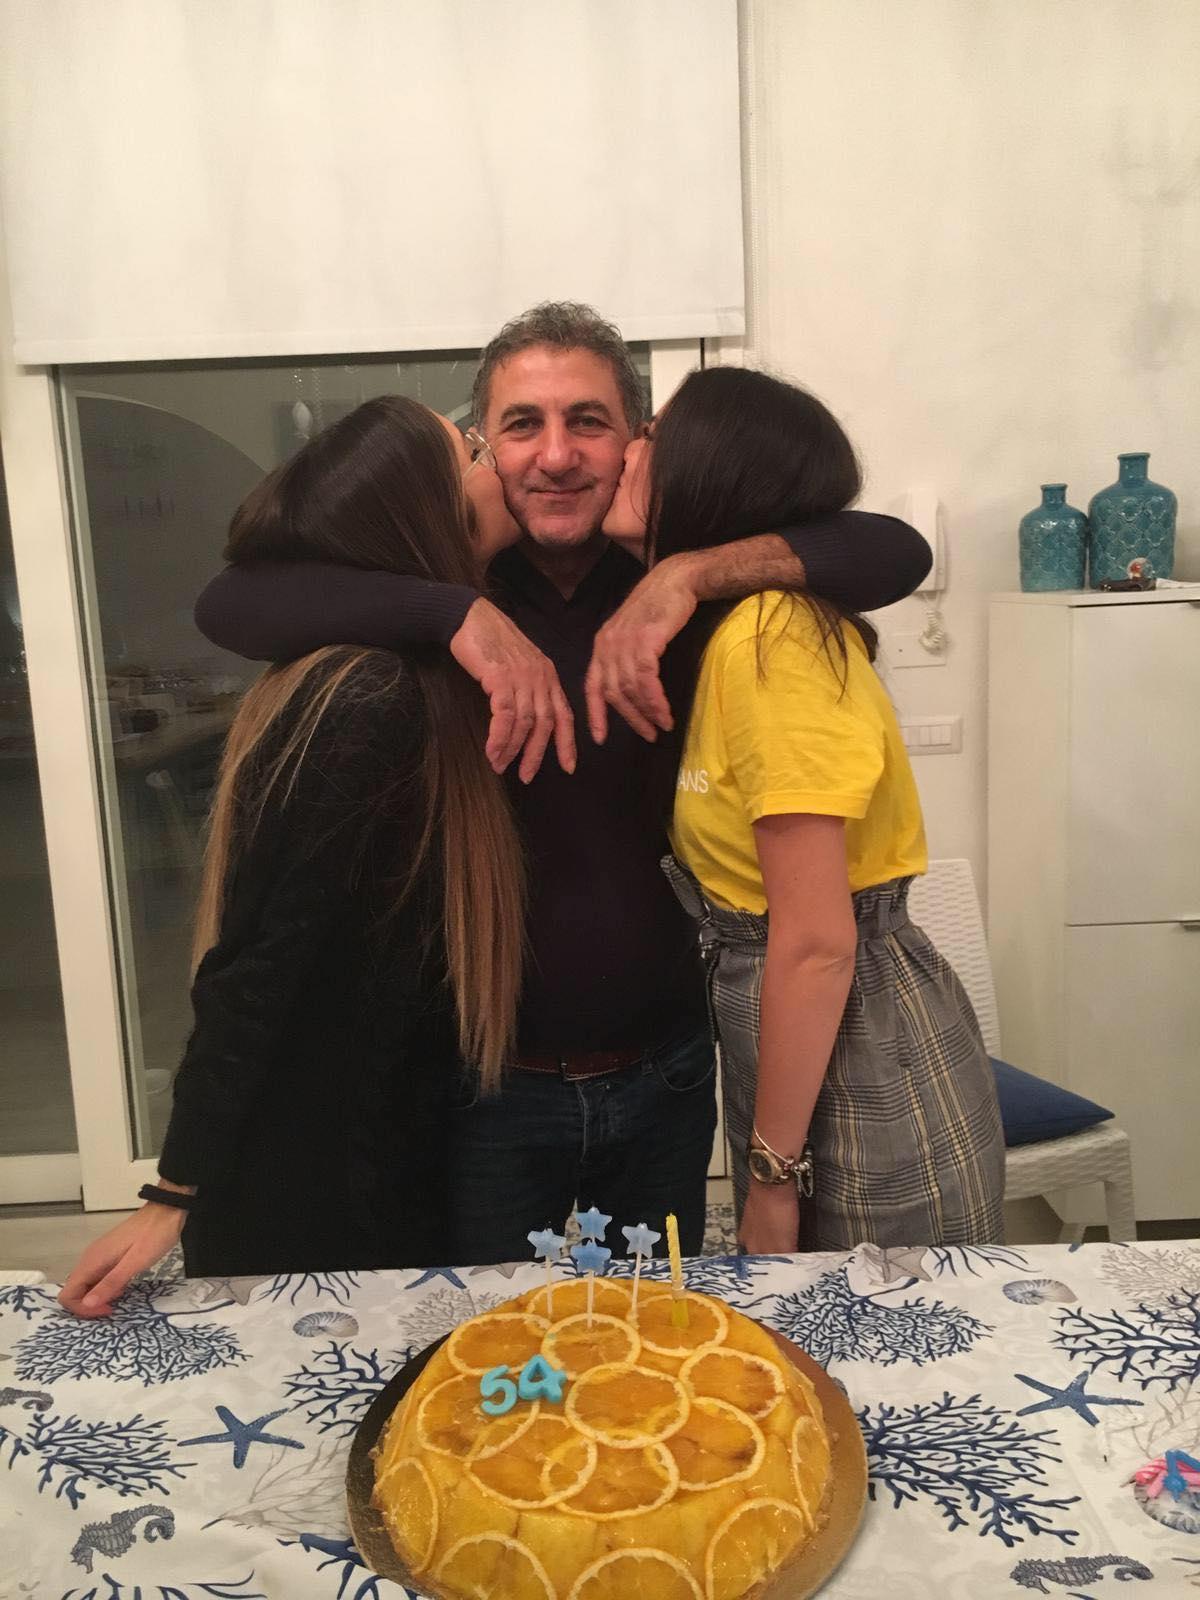 Caterina (L) and Melissa with Caterina's dad. (Courtesy of Caterina Alagna)